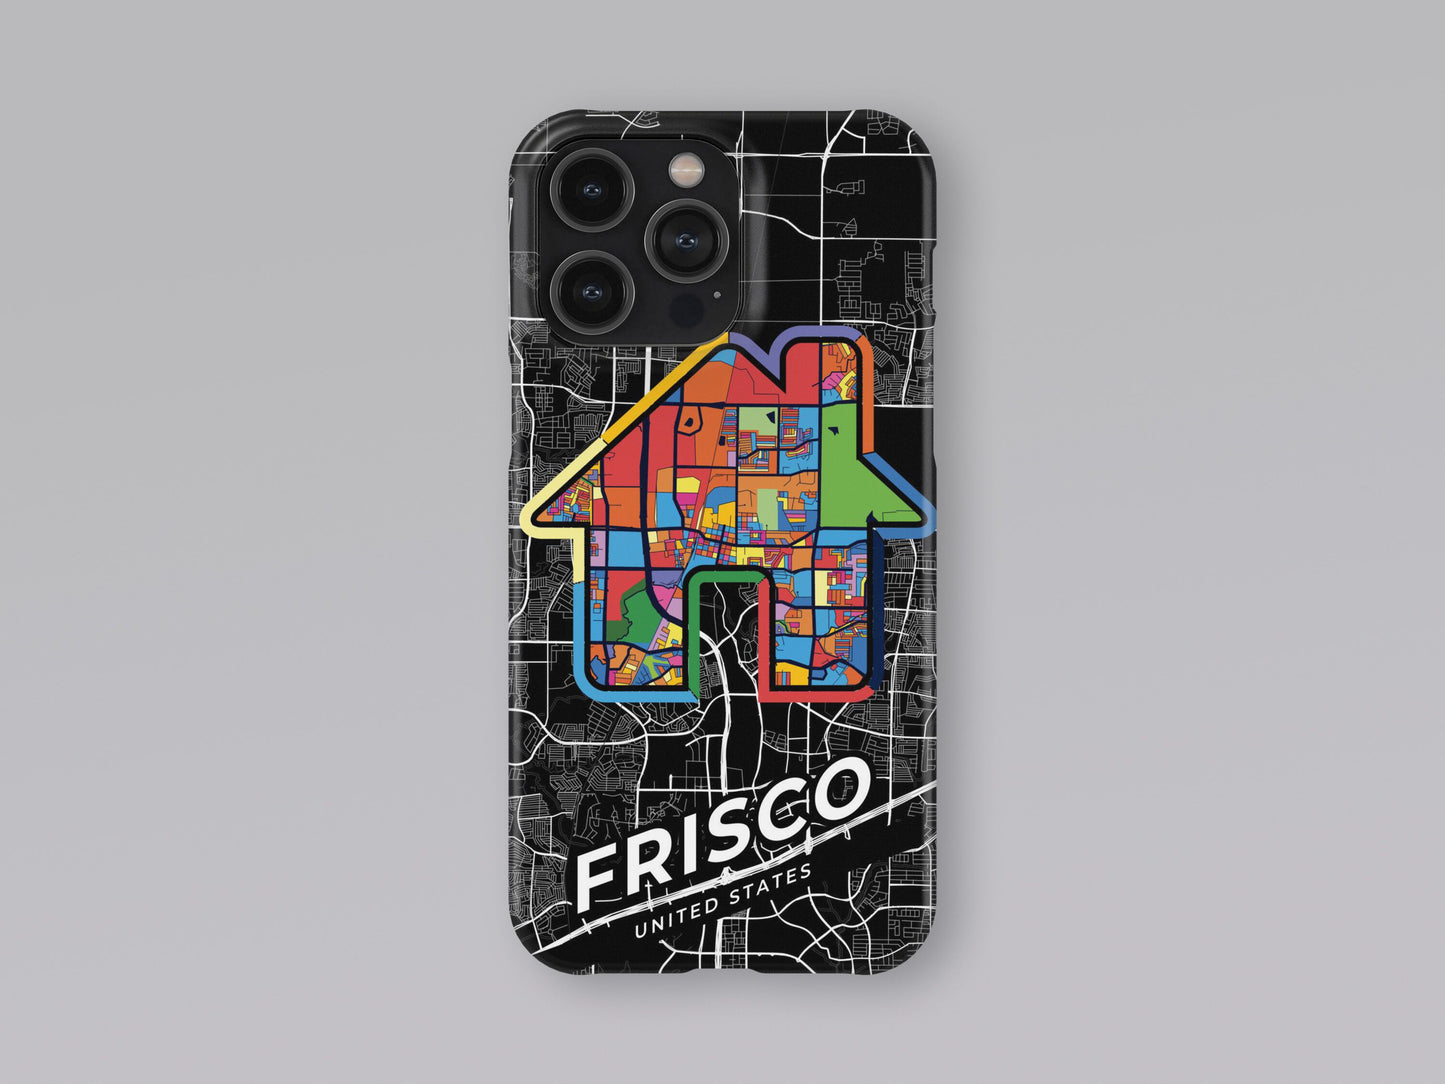 Frisco Texas slim phone case with colorful icon. Birthday, wedding or housewarming gift. Couple match cases. 3